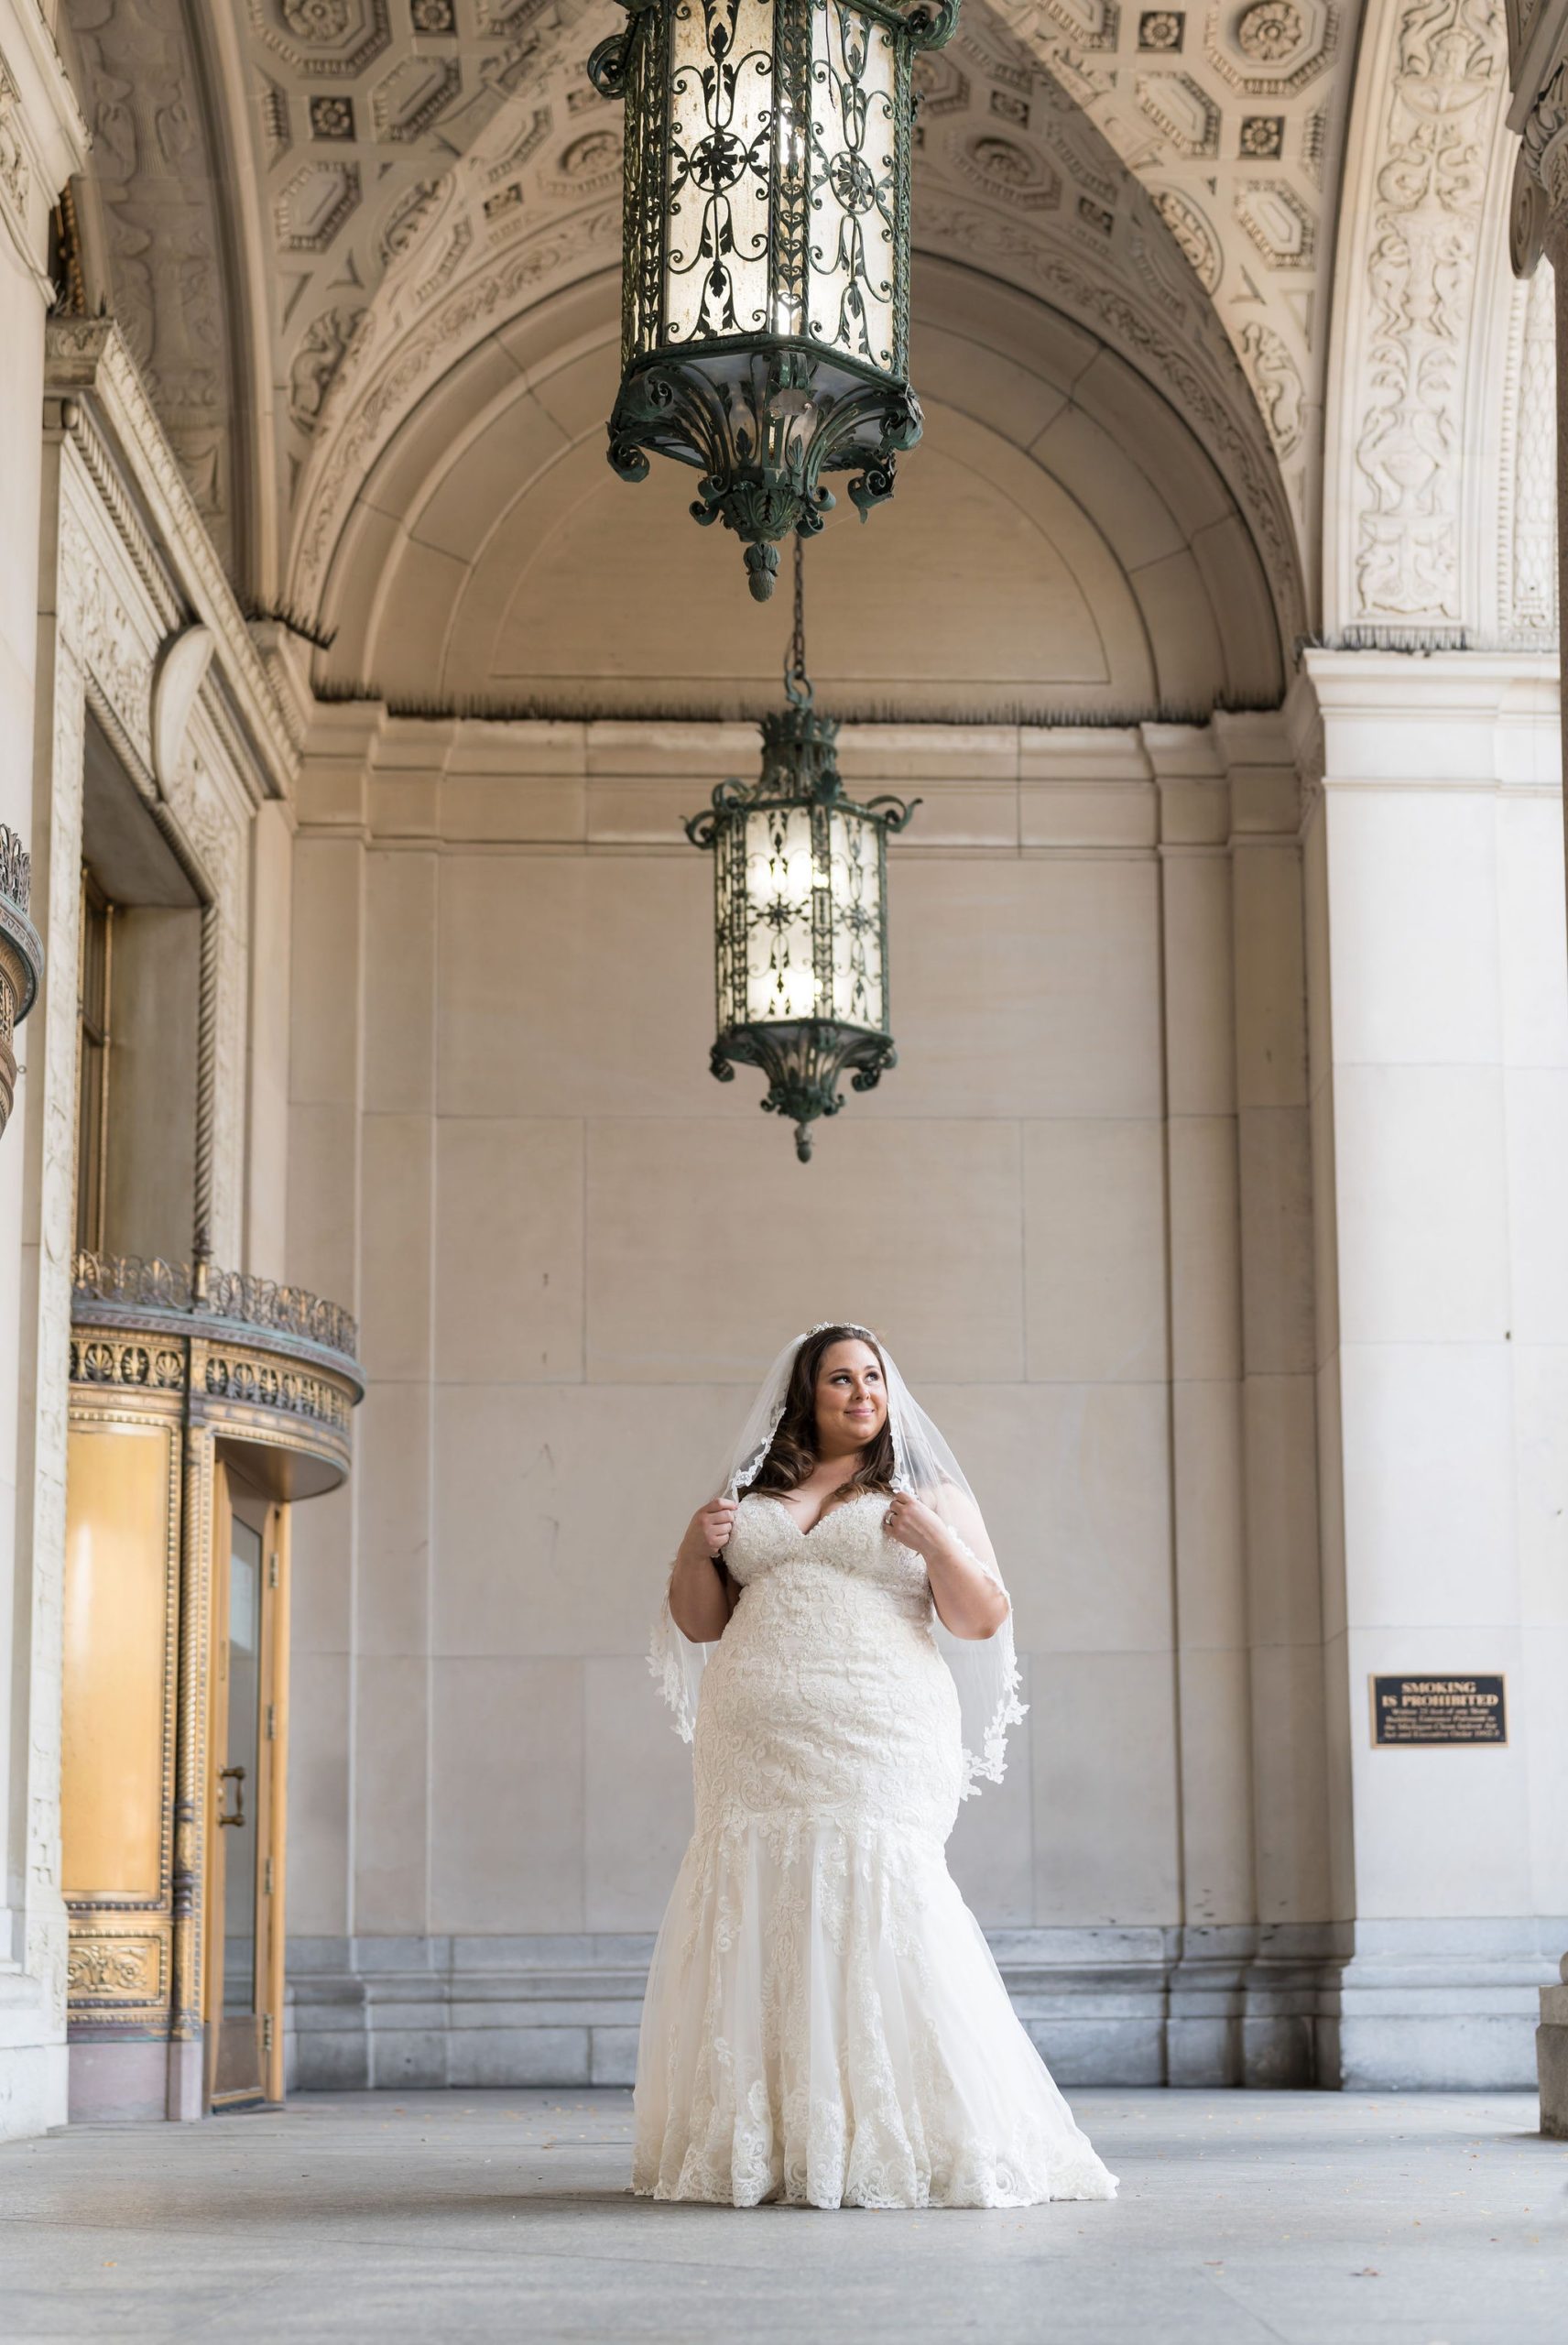 A bride poses in front of Cadillac Place Apartments in Detroit while holding her veil.